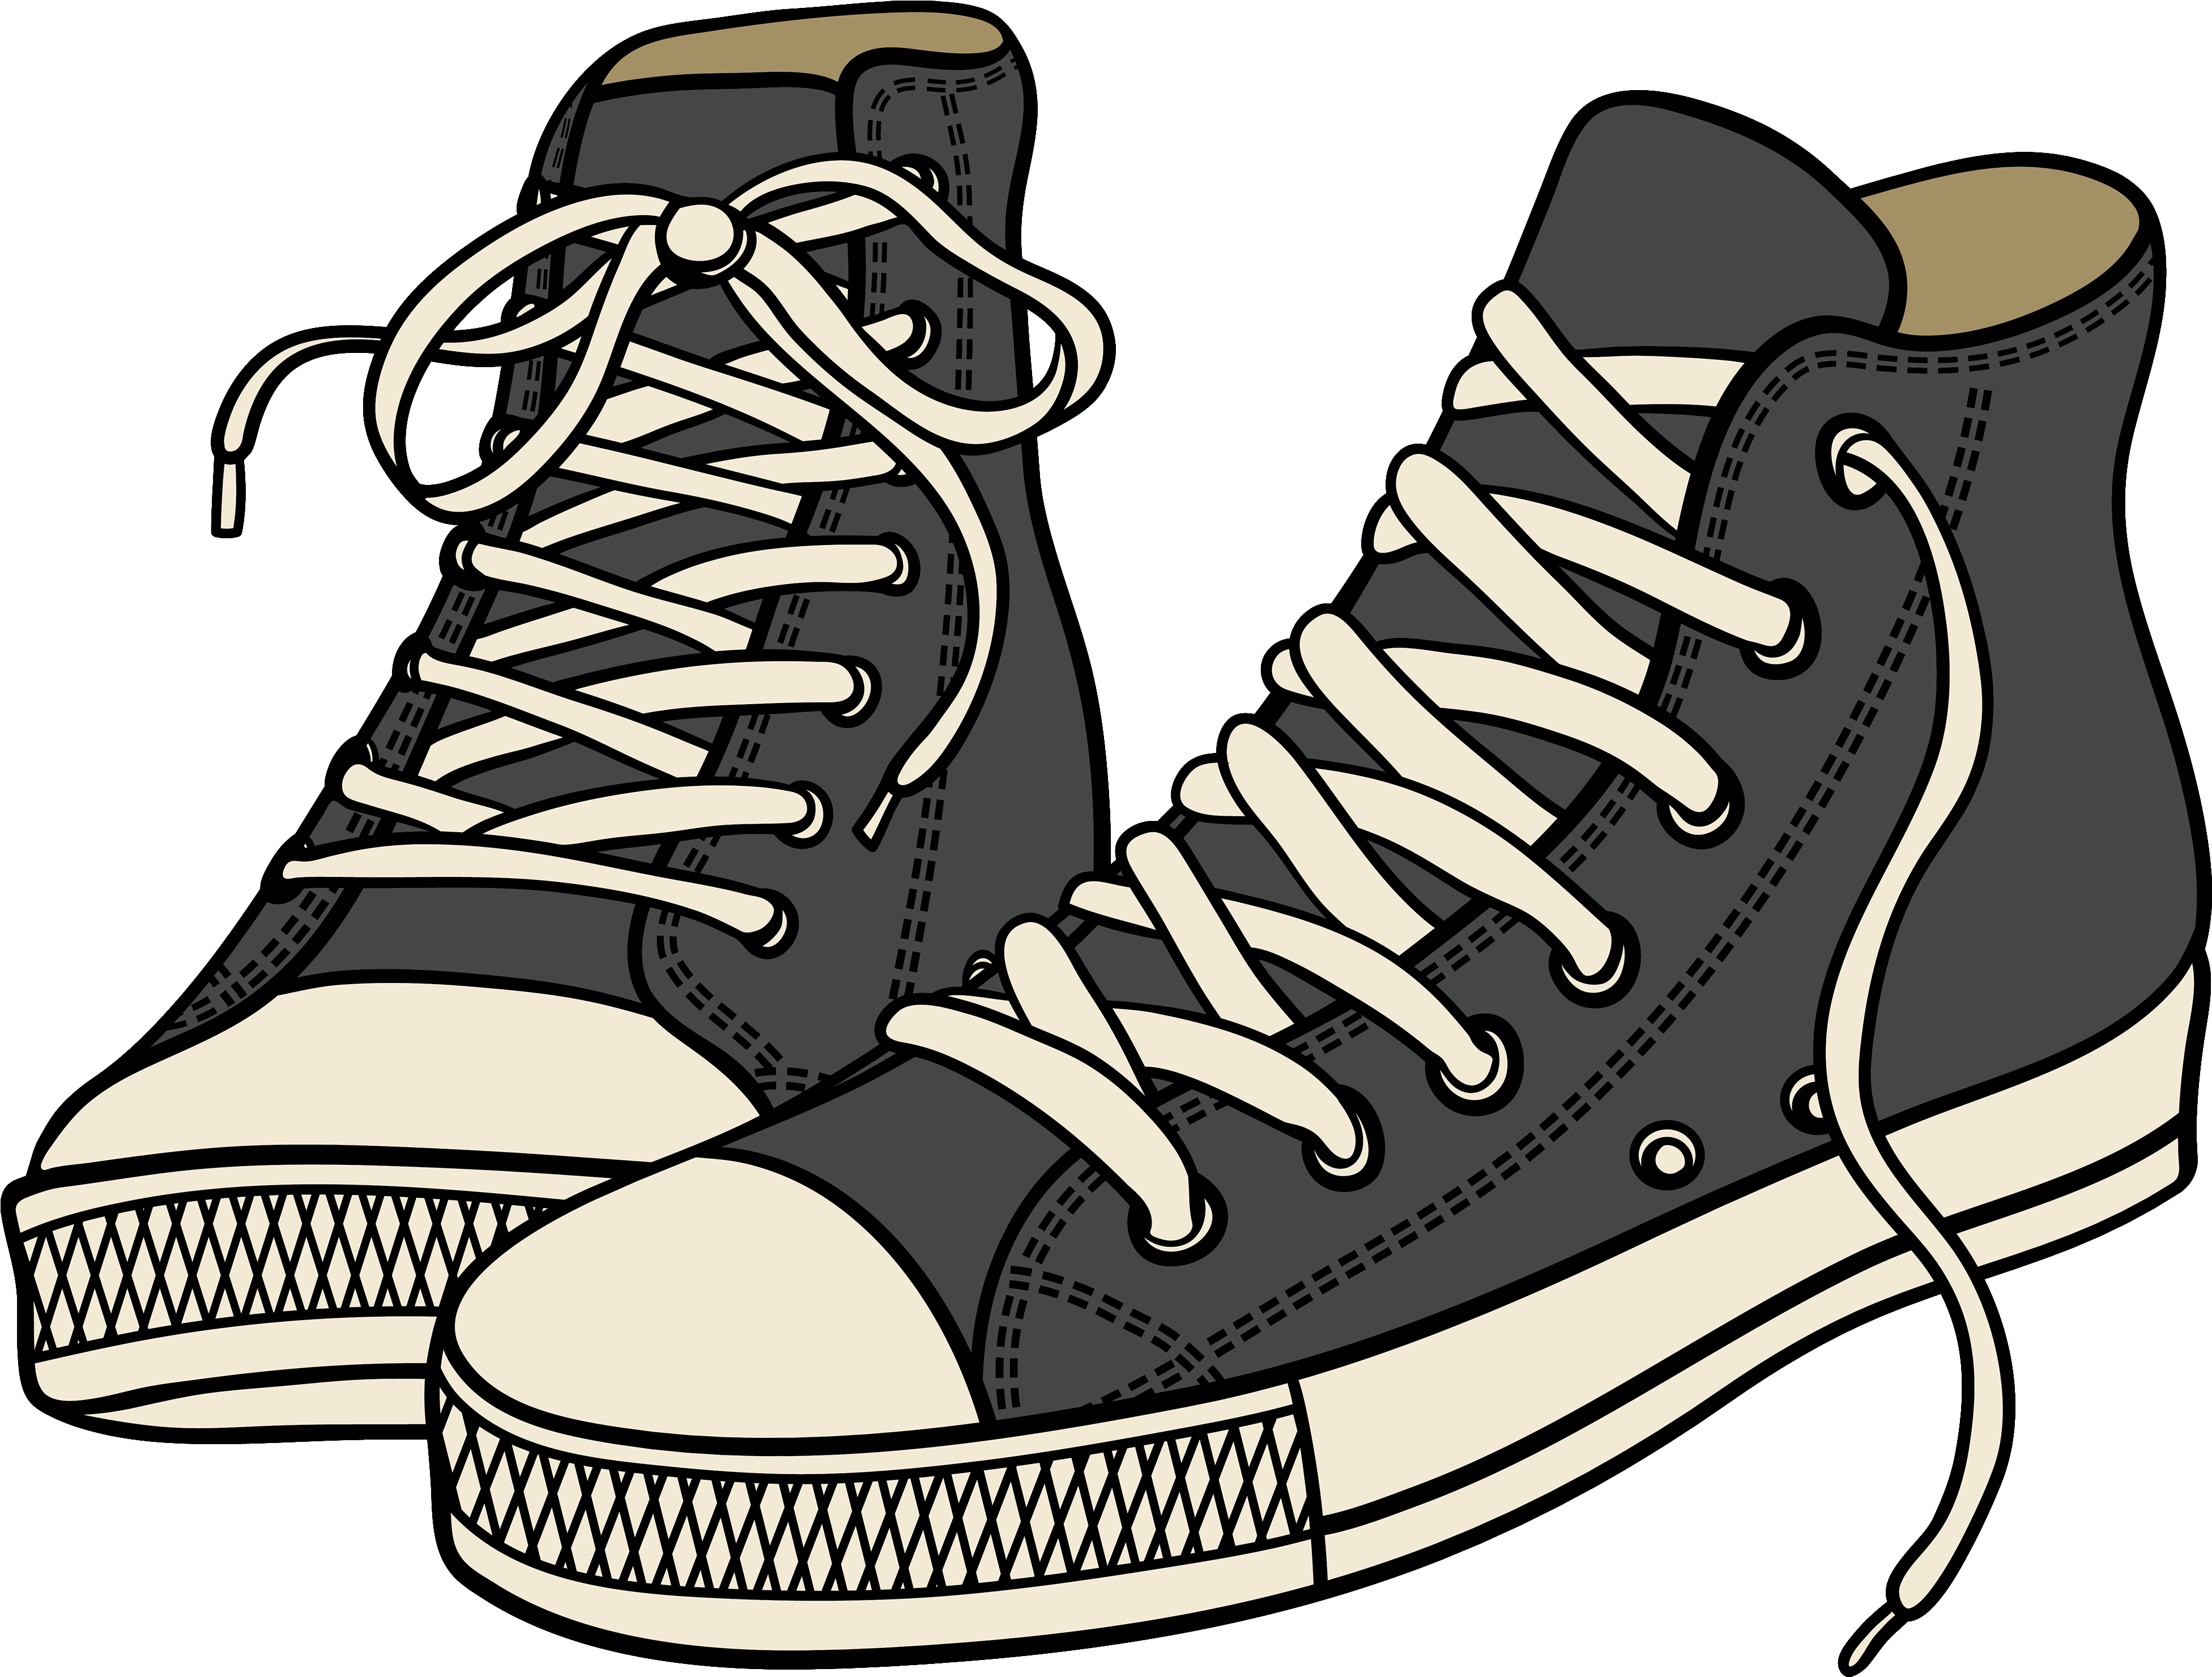 Classic High Top Sneakers Illustration